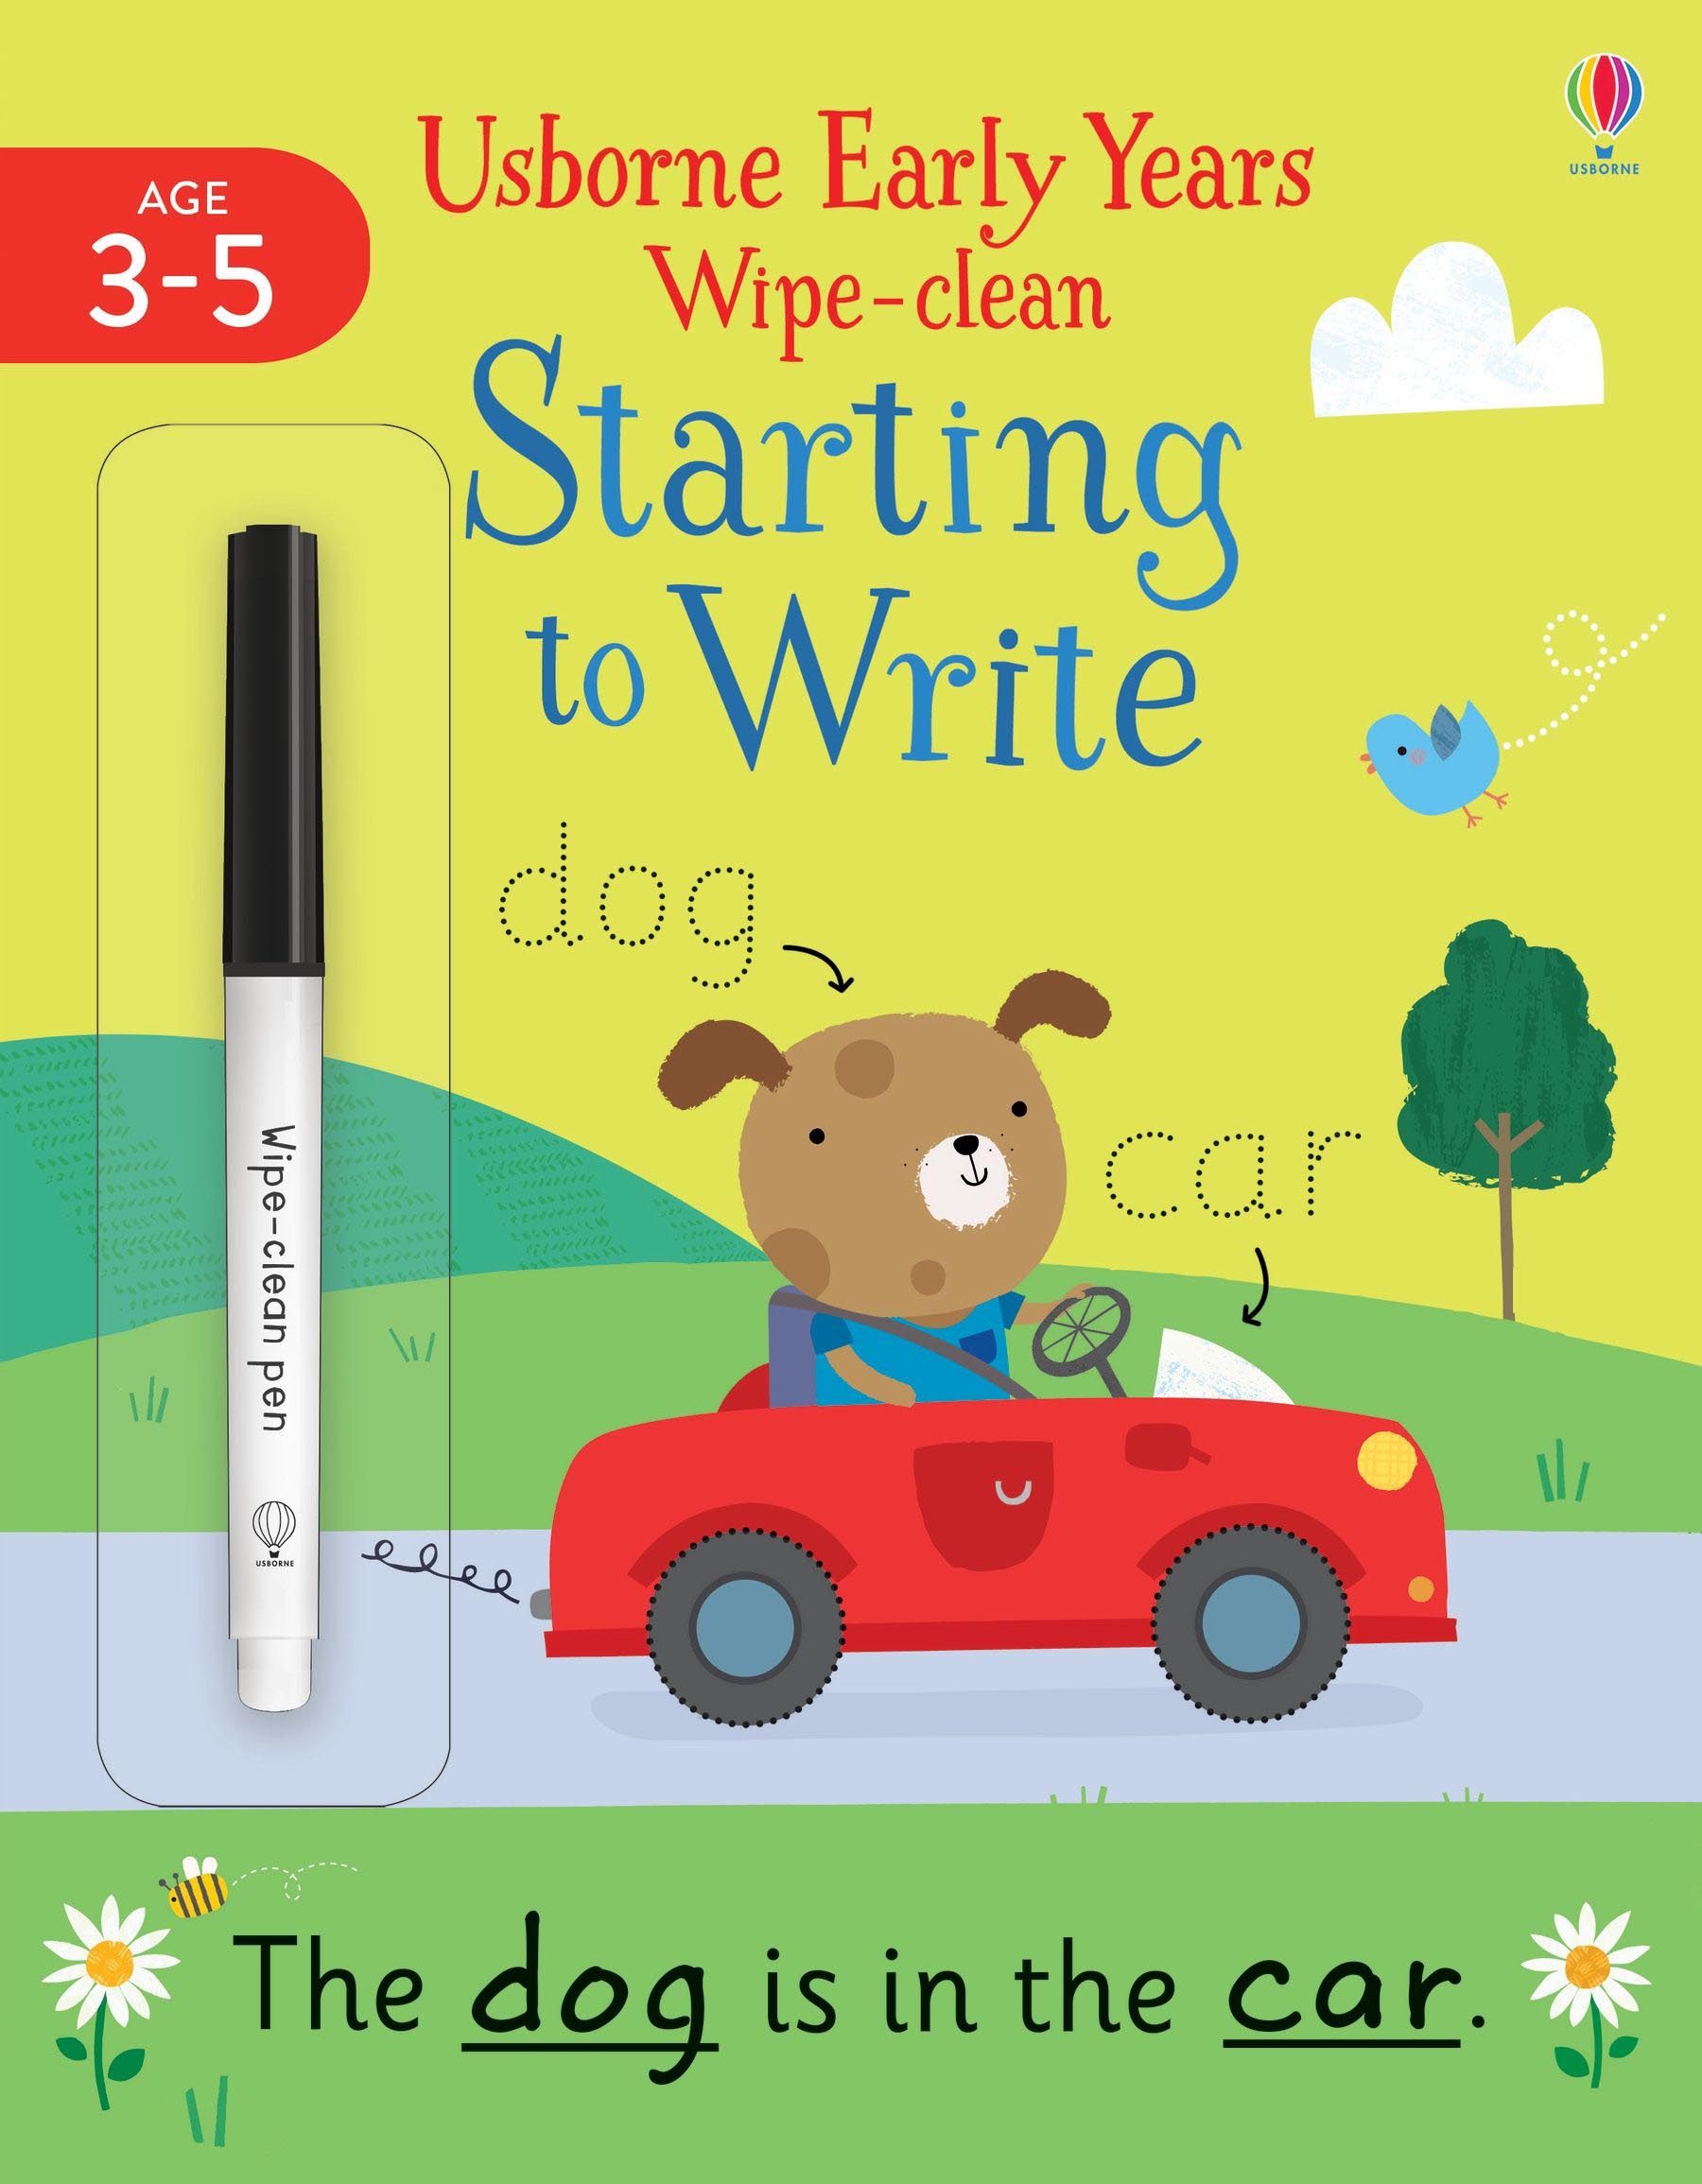 Usborne Early Years Wipe Clean Starting to Write ( Age 3-5 )